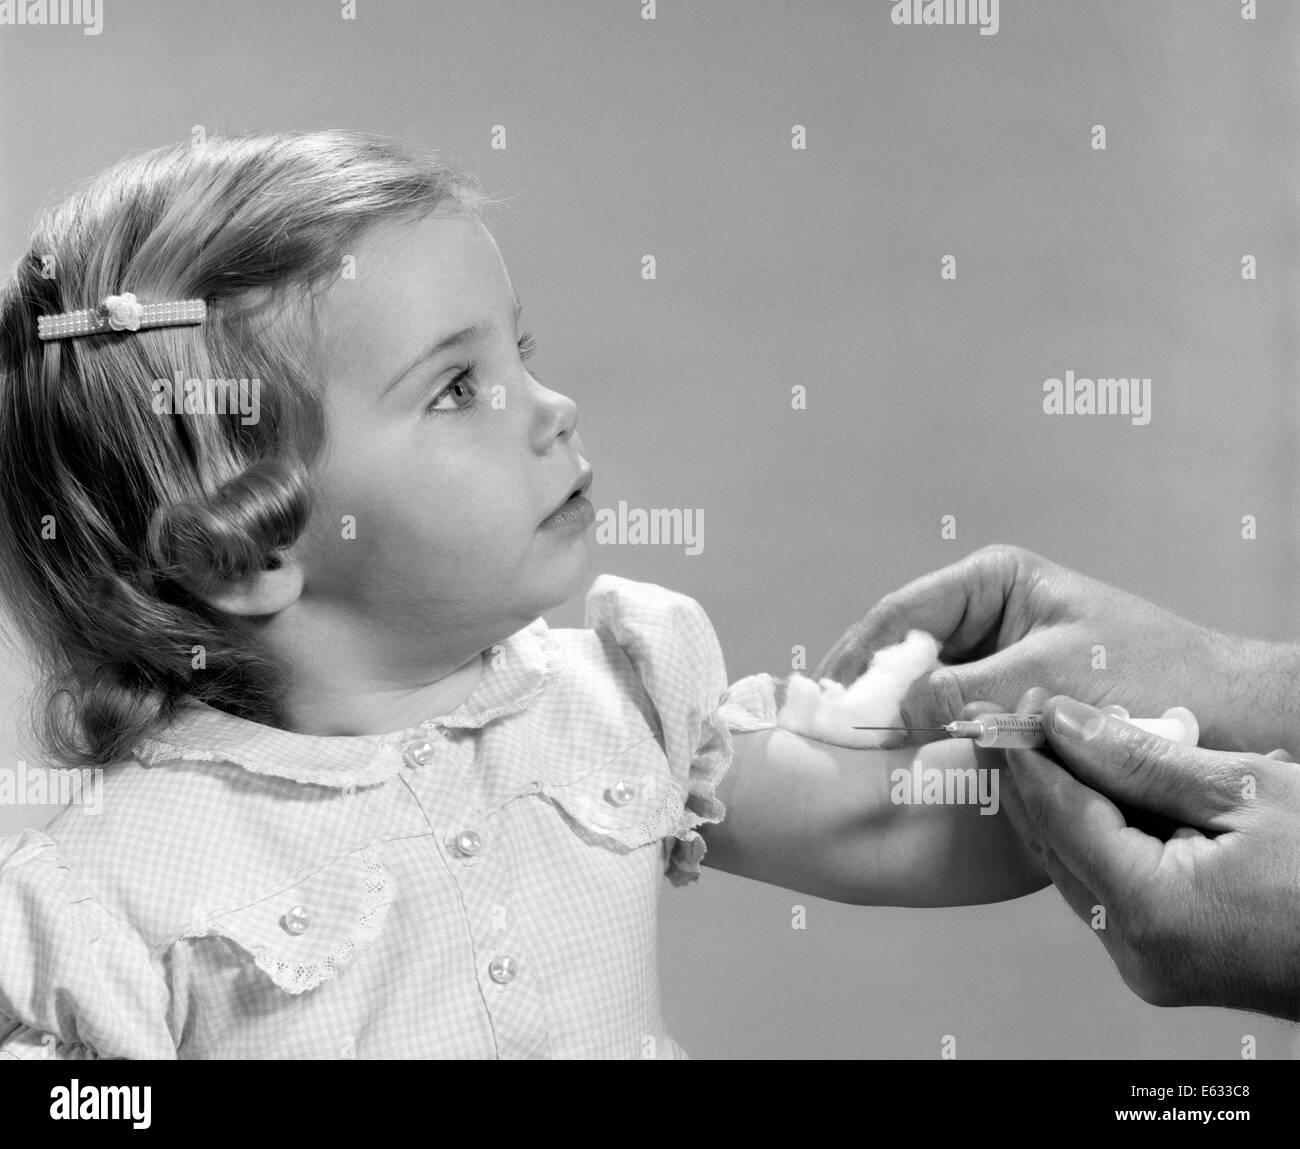 1960s 1960s LITTLE GIRL GETTING SHOT HYPODERMIC NEEDLE VACCINATION INJECTION IMMUNIZATION VACCINE Stock Photo